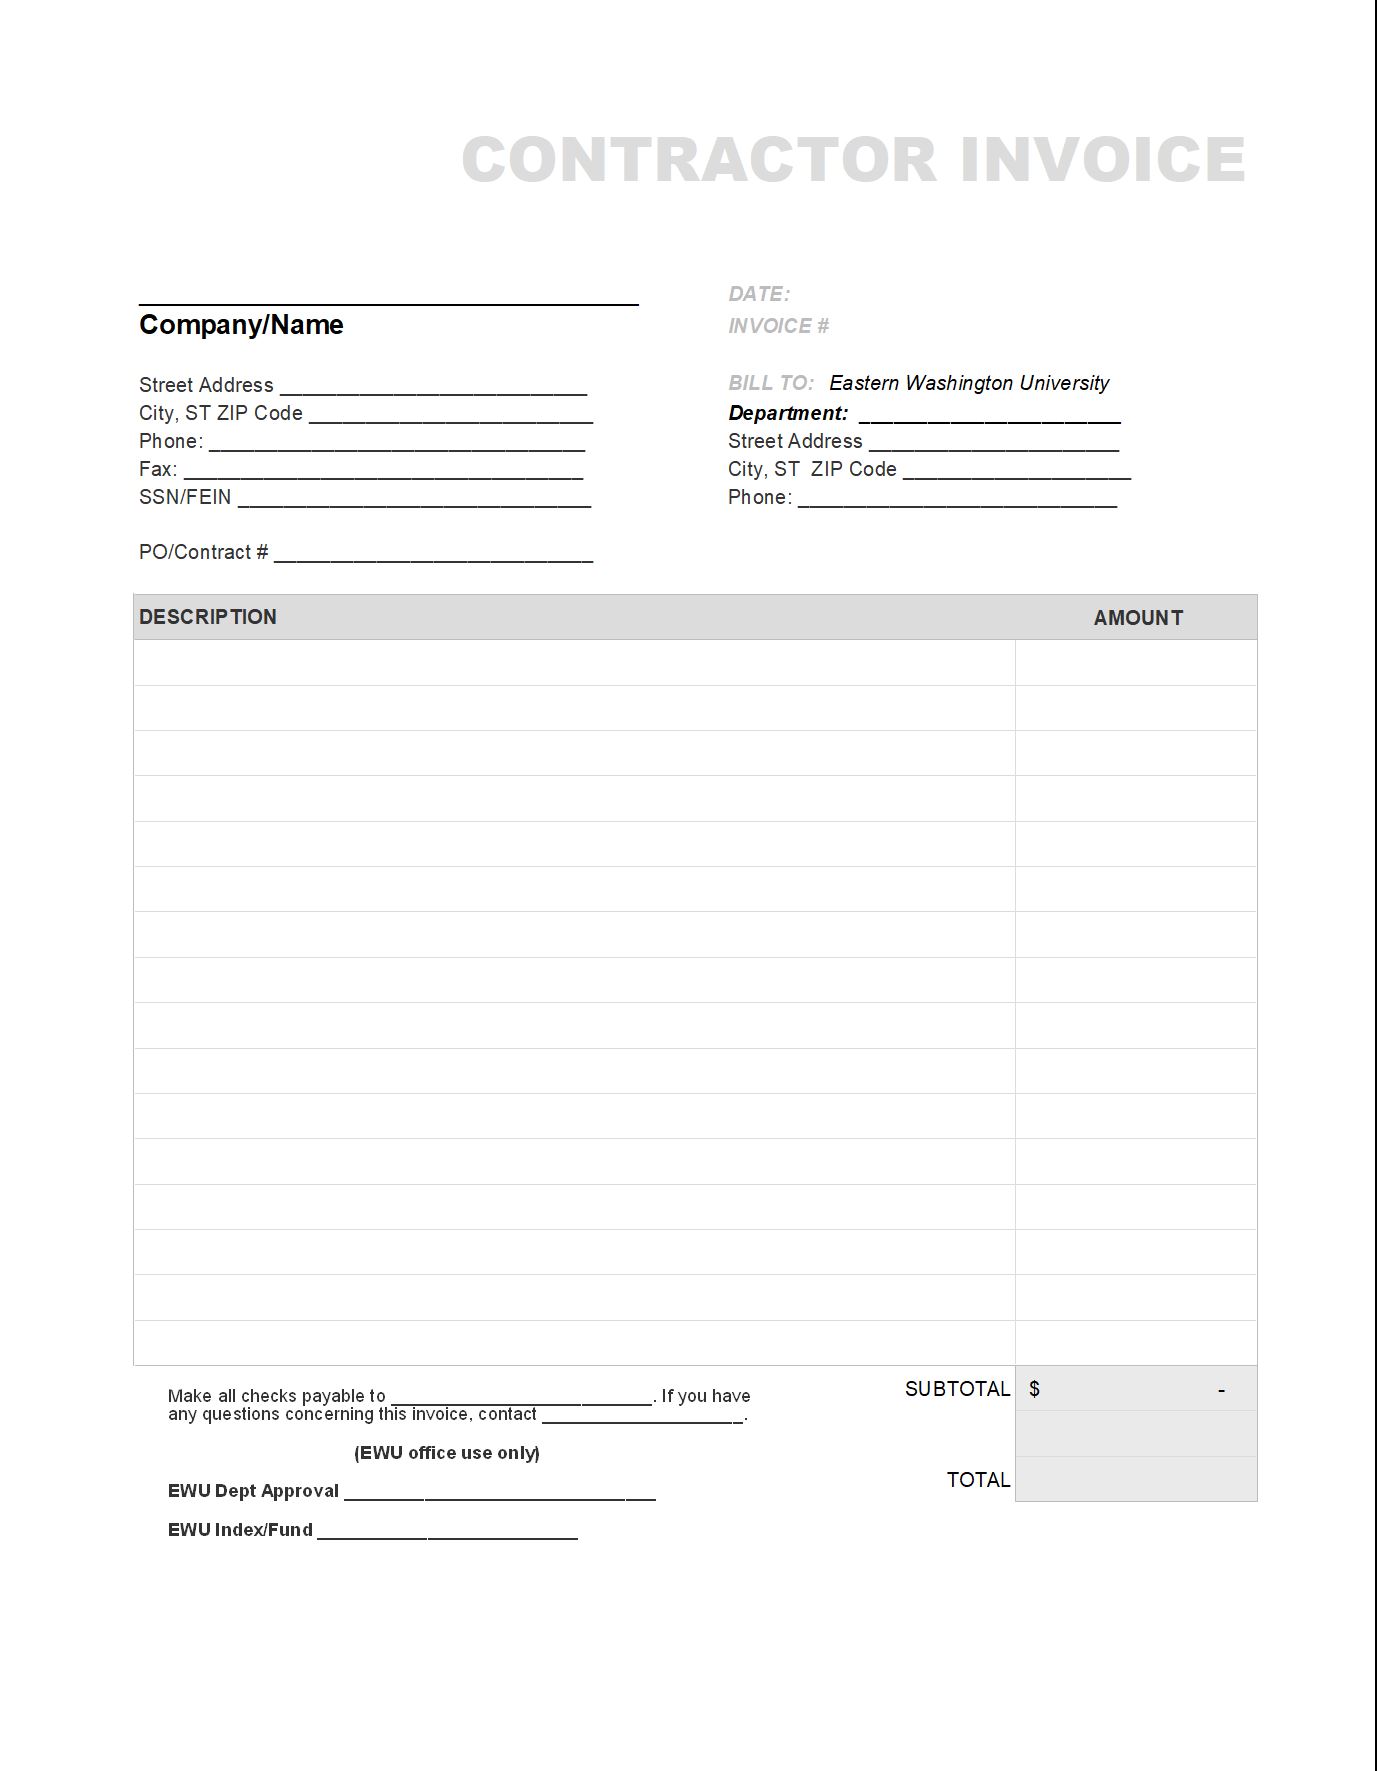 22 Independent Contractor Invoice Templates (FREE) With Regard To Contract Labor Invoice Template